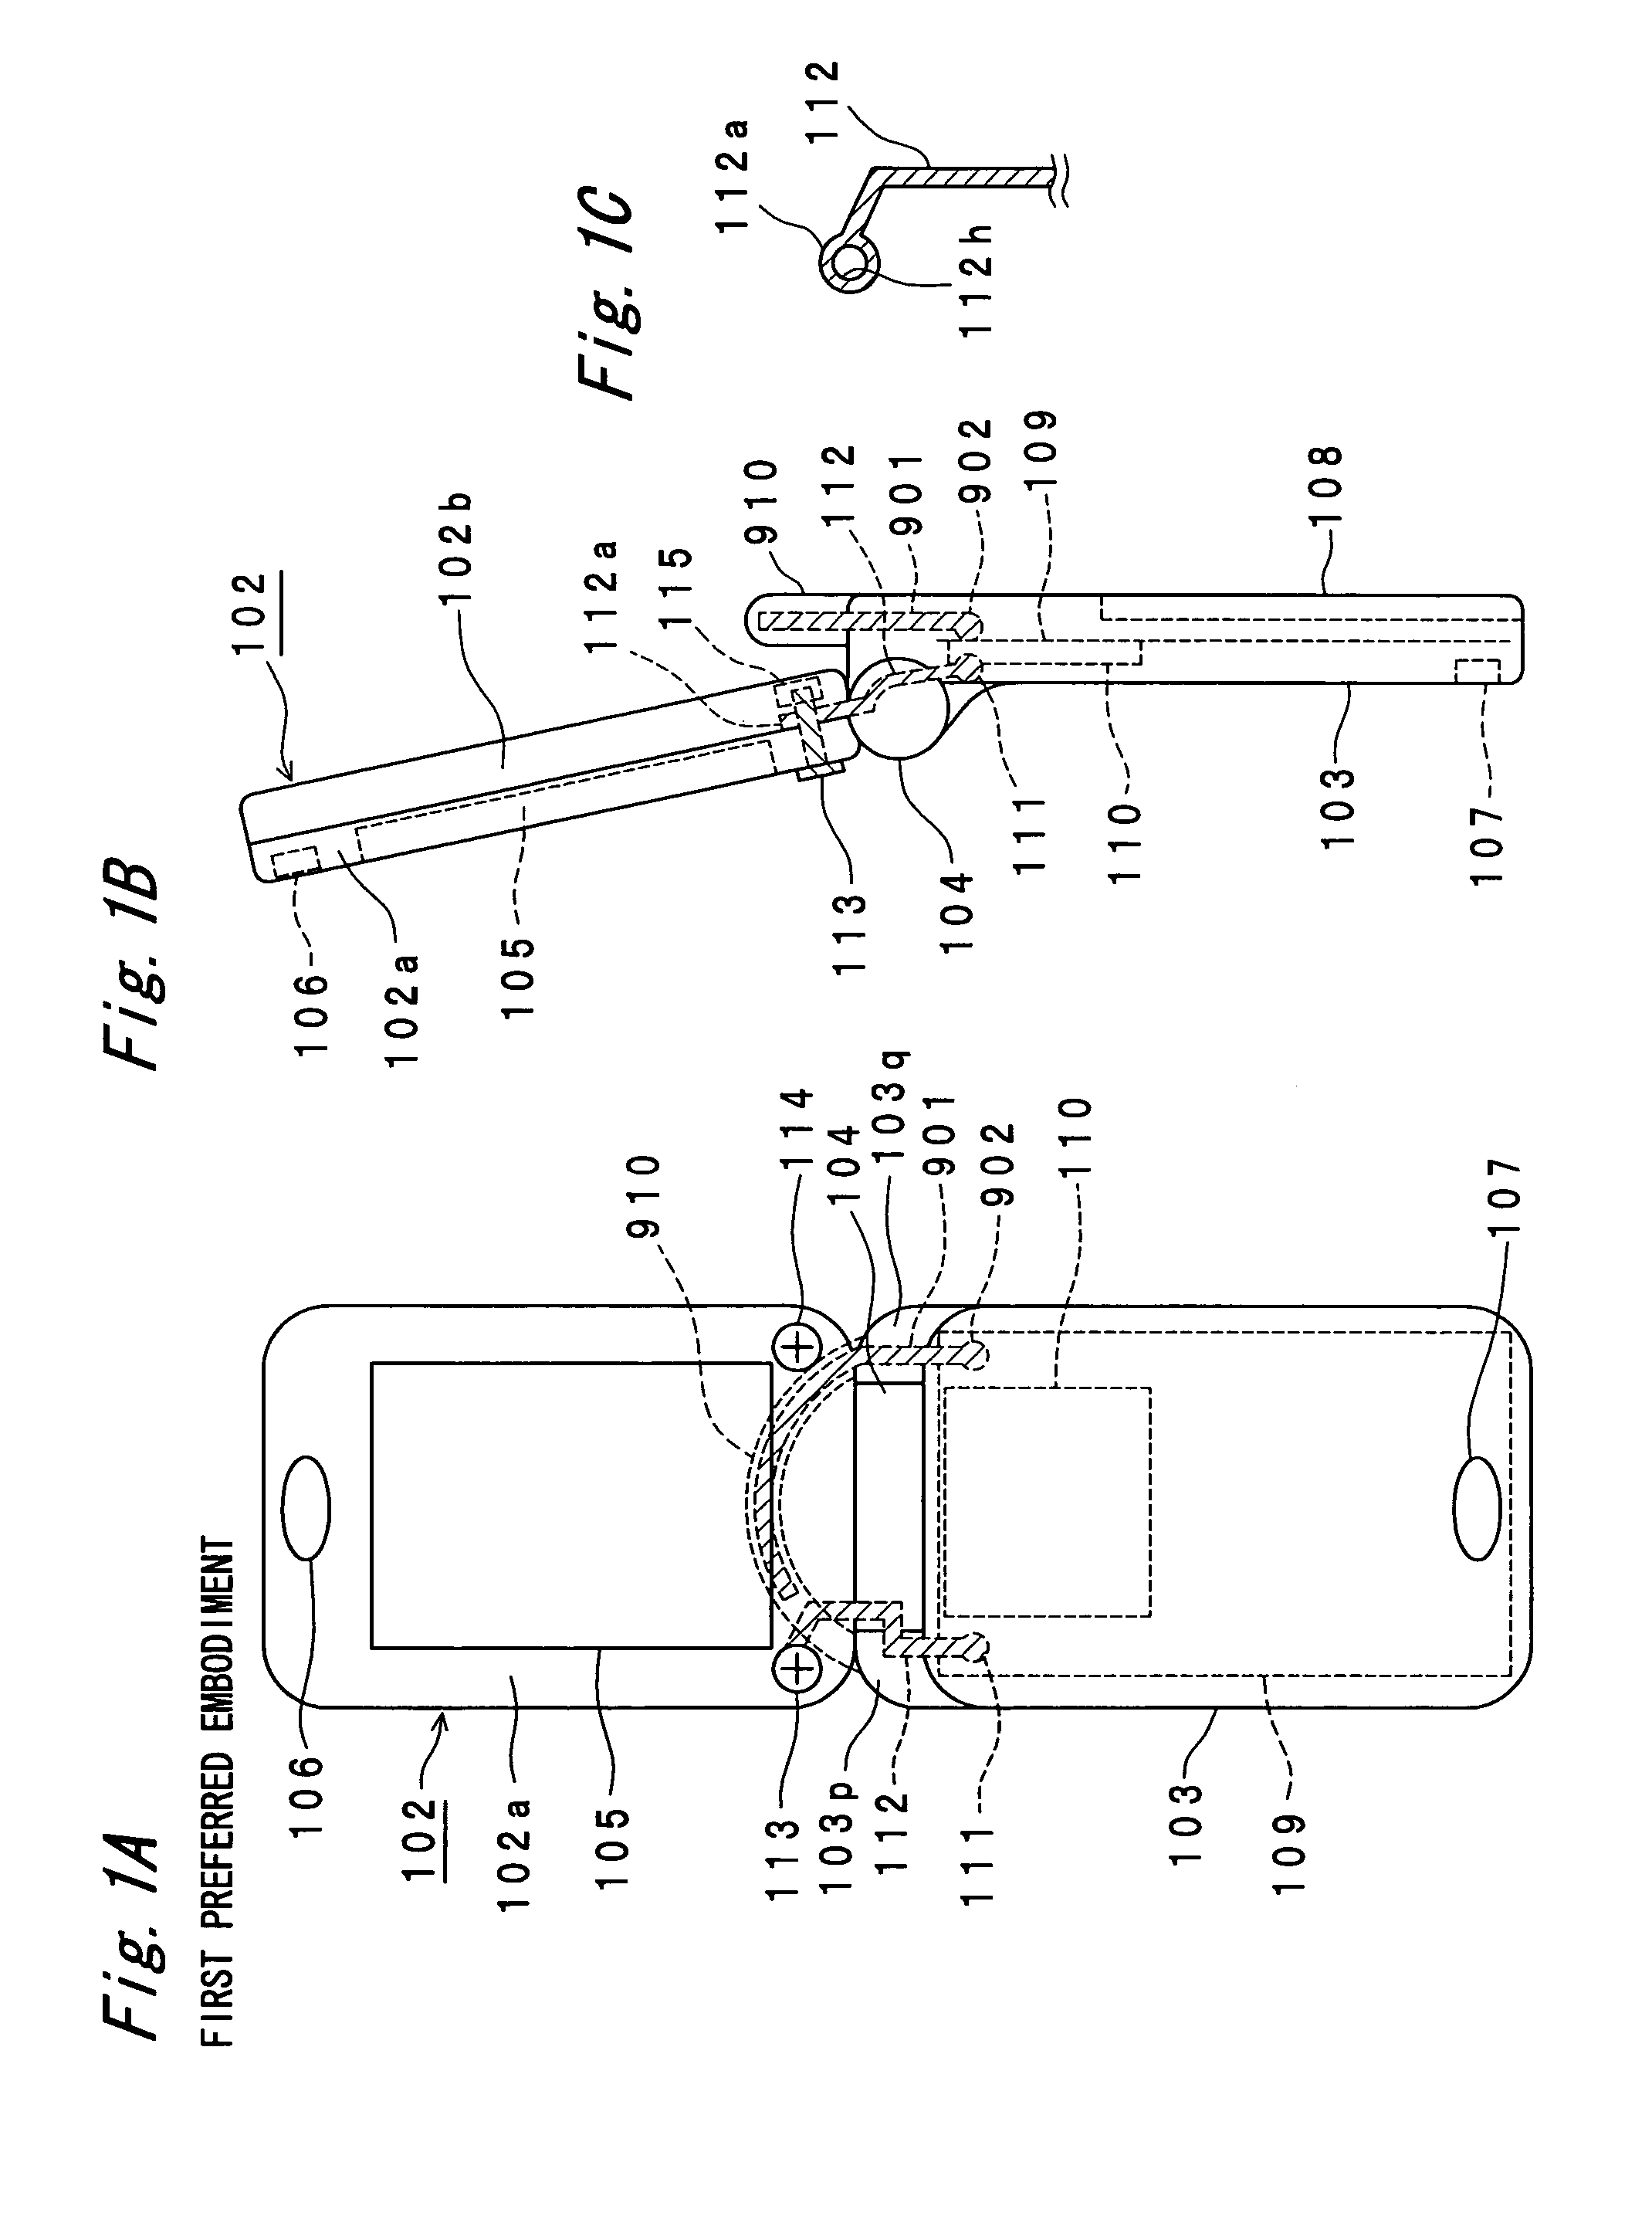 Portable radio communication apparatus provided with a part of a housing operating as an antenna